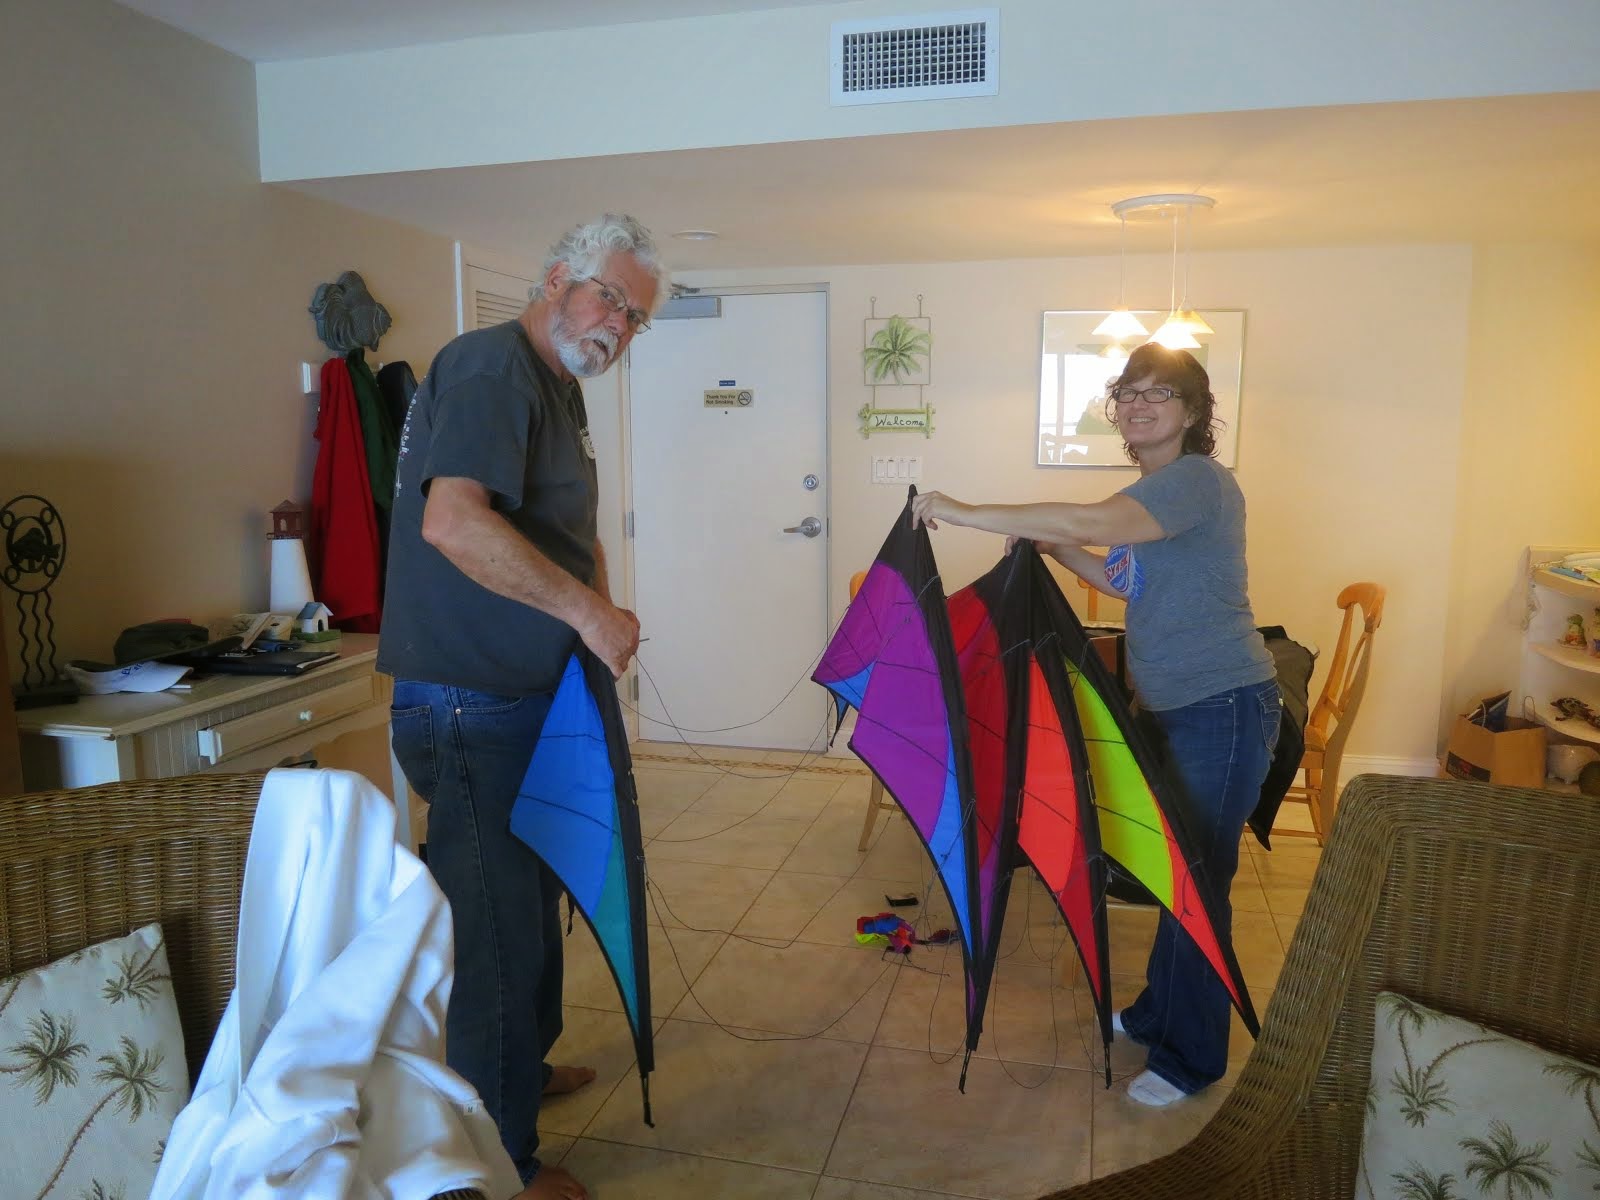 Erecting the Tandem Kites the First Time